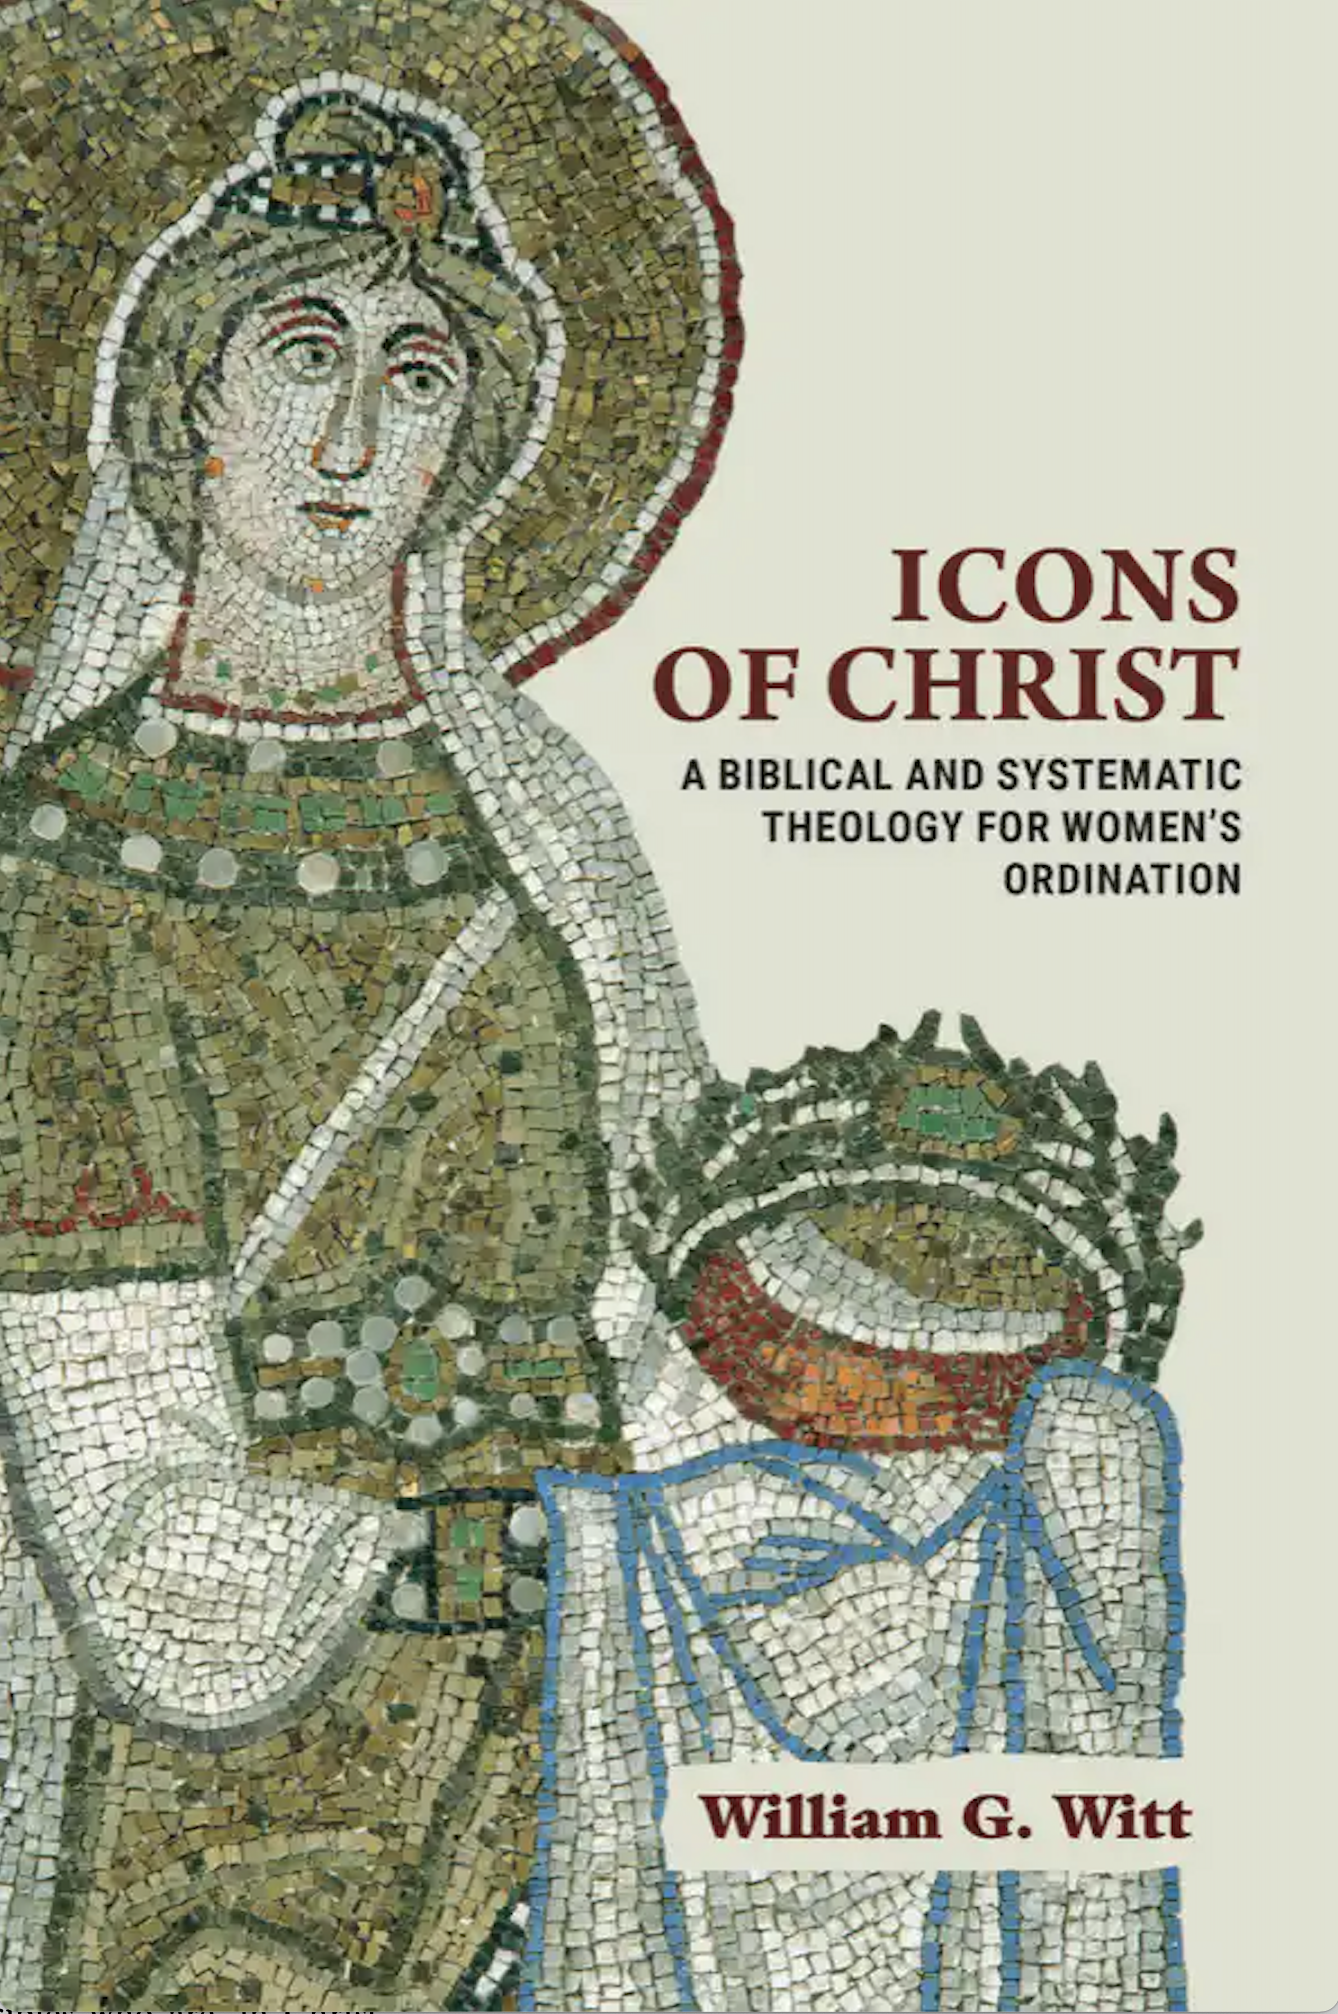 Icons of Christ: A Biblical and Systematic Theology for Women’s Ordination (Book Review)